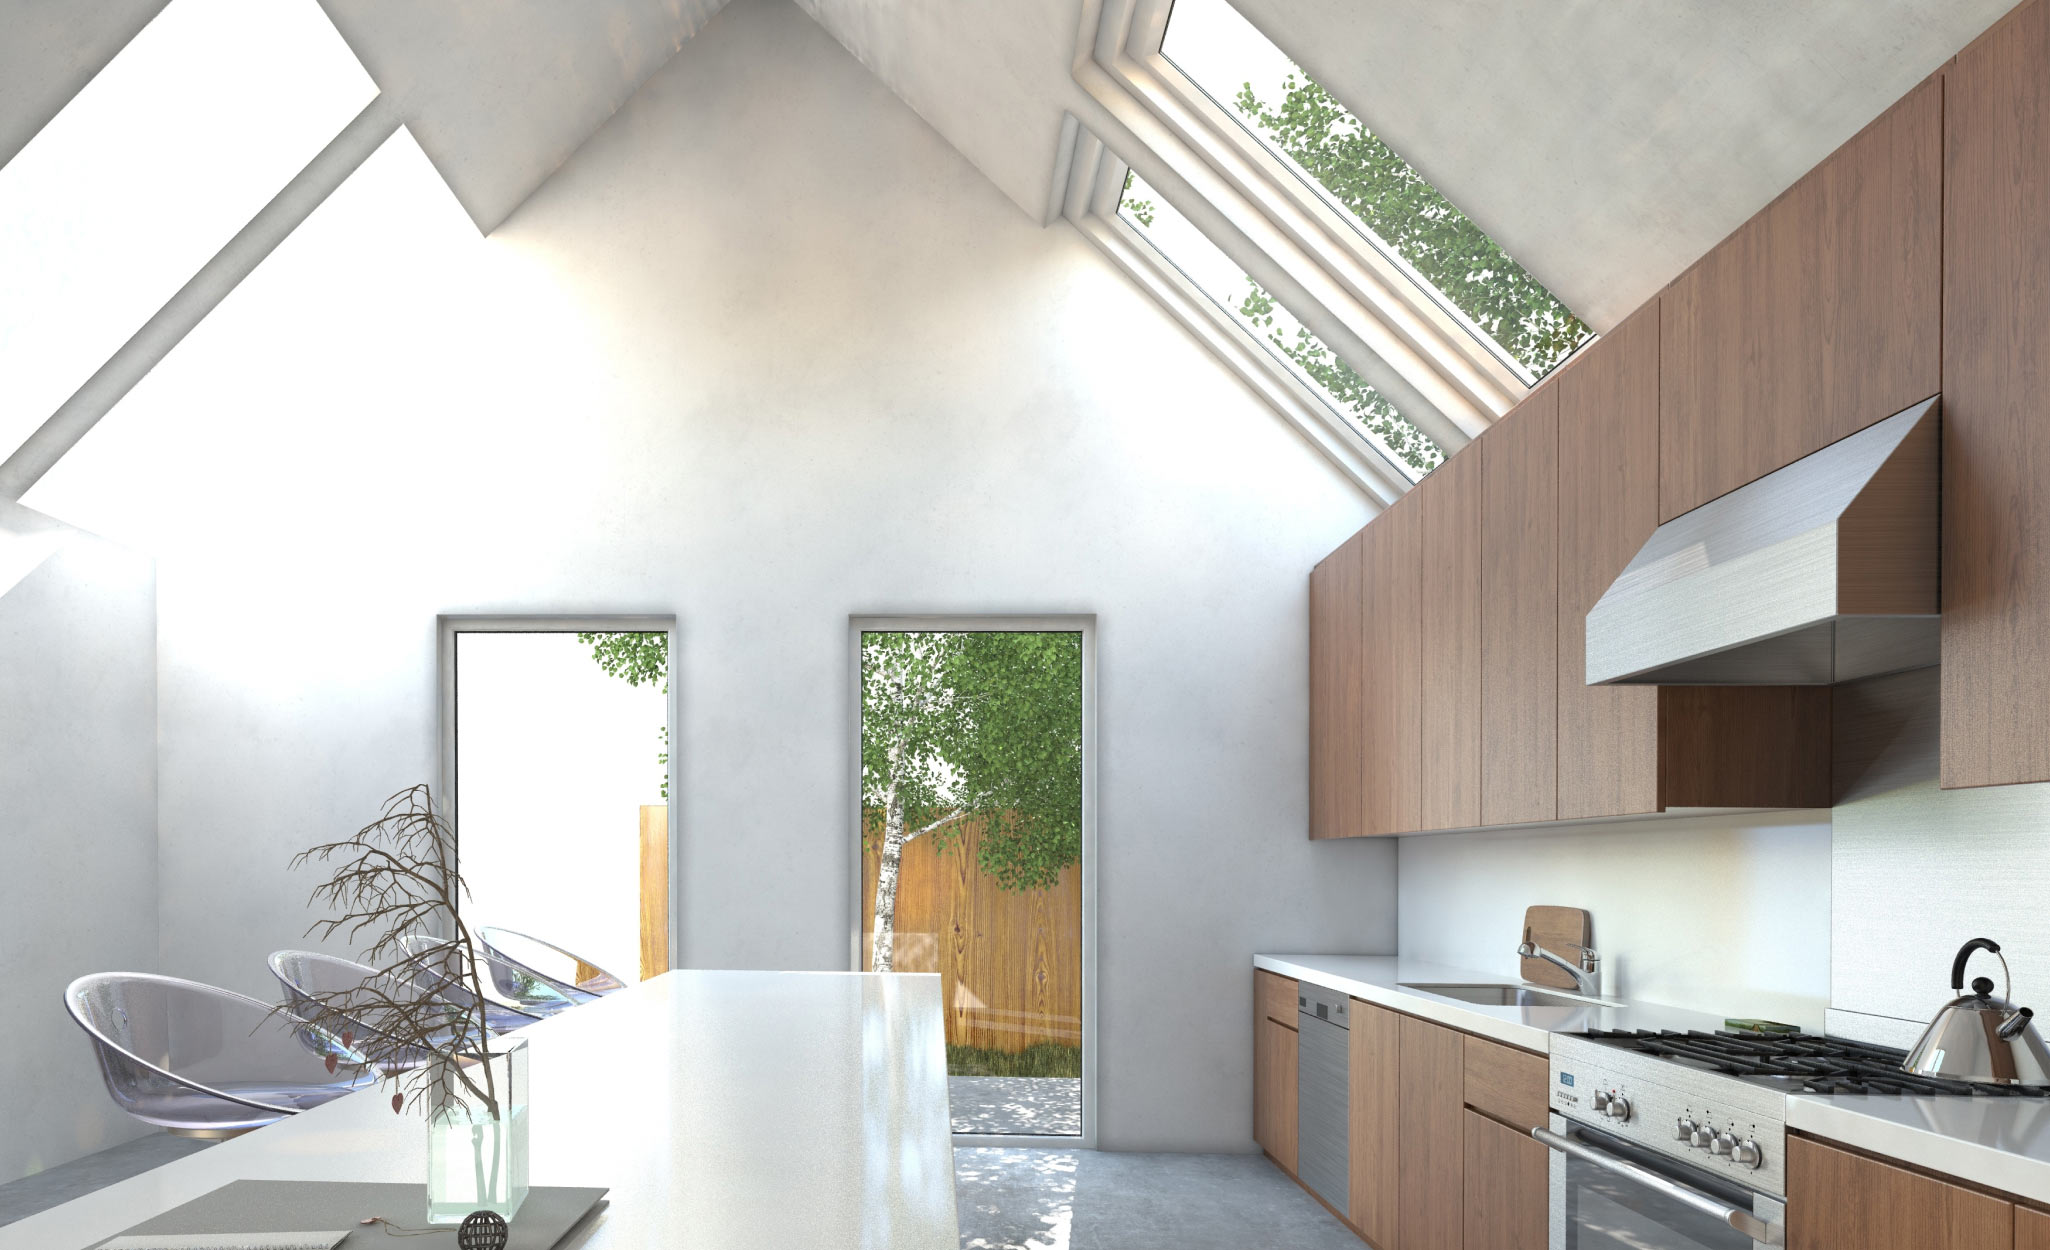 Skylights bring more natural light into a home.